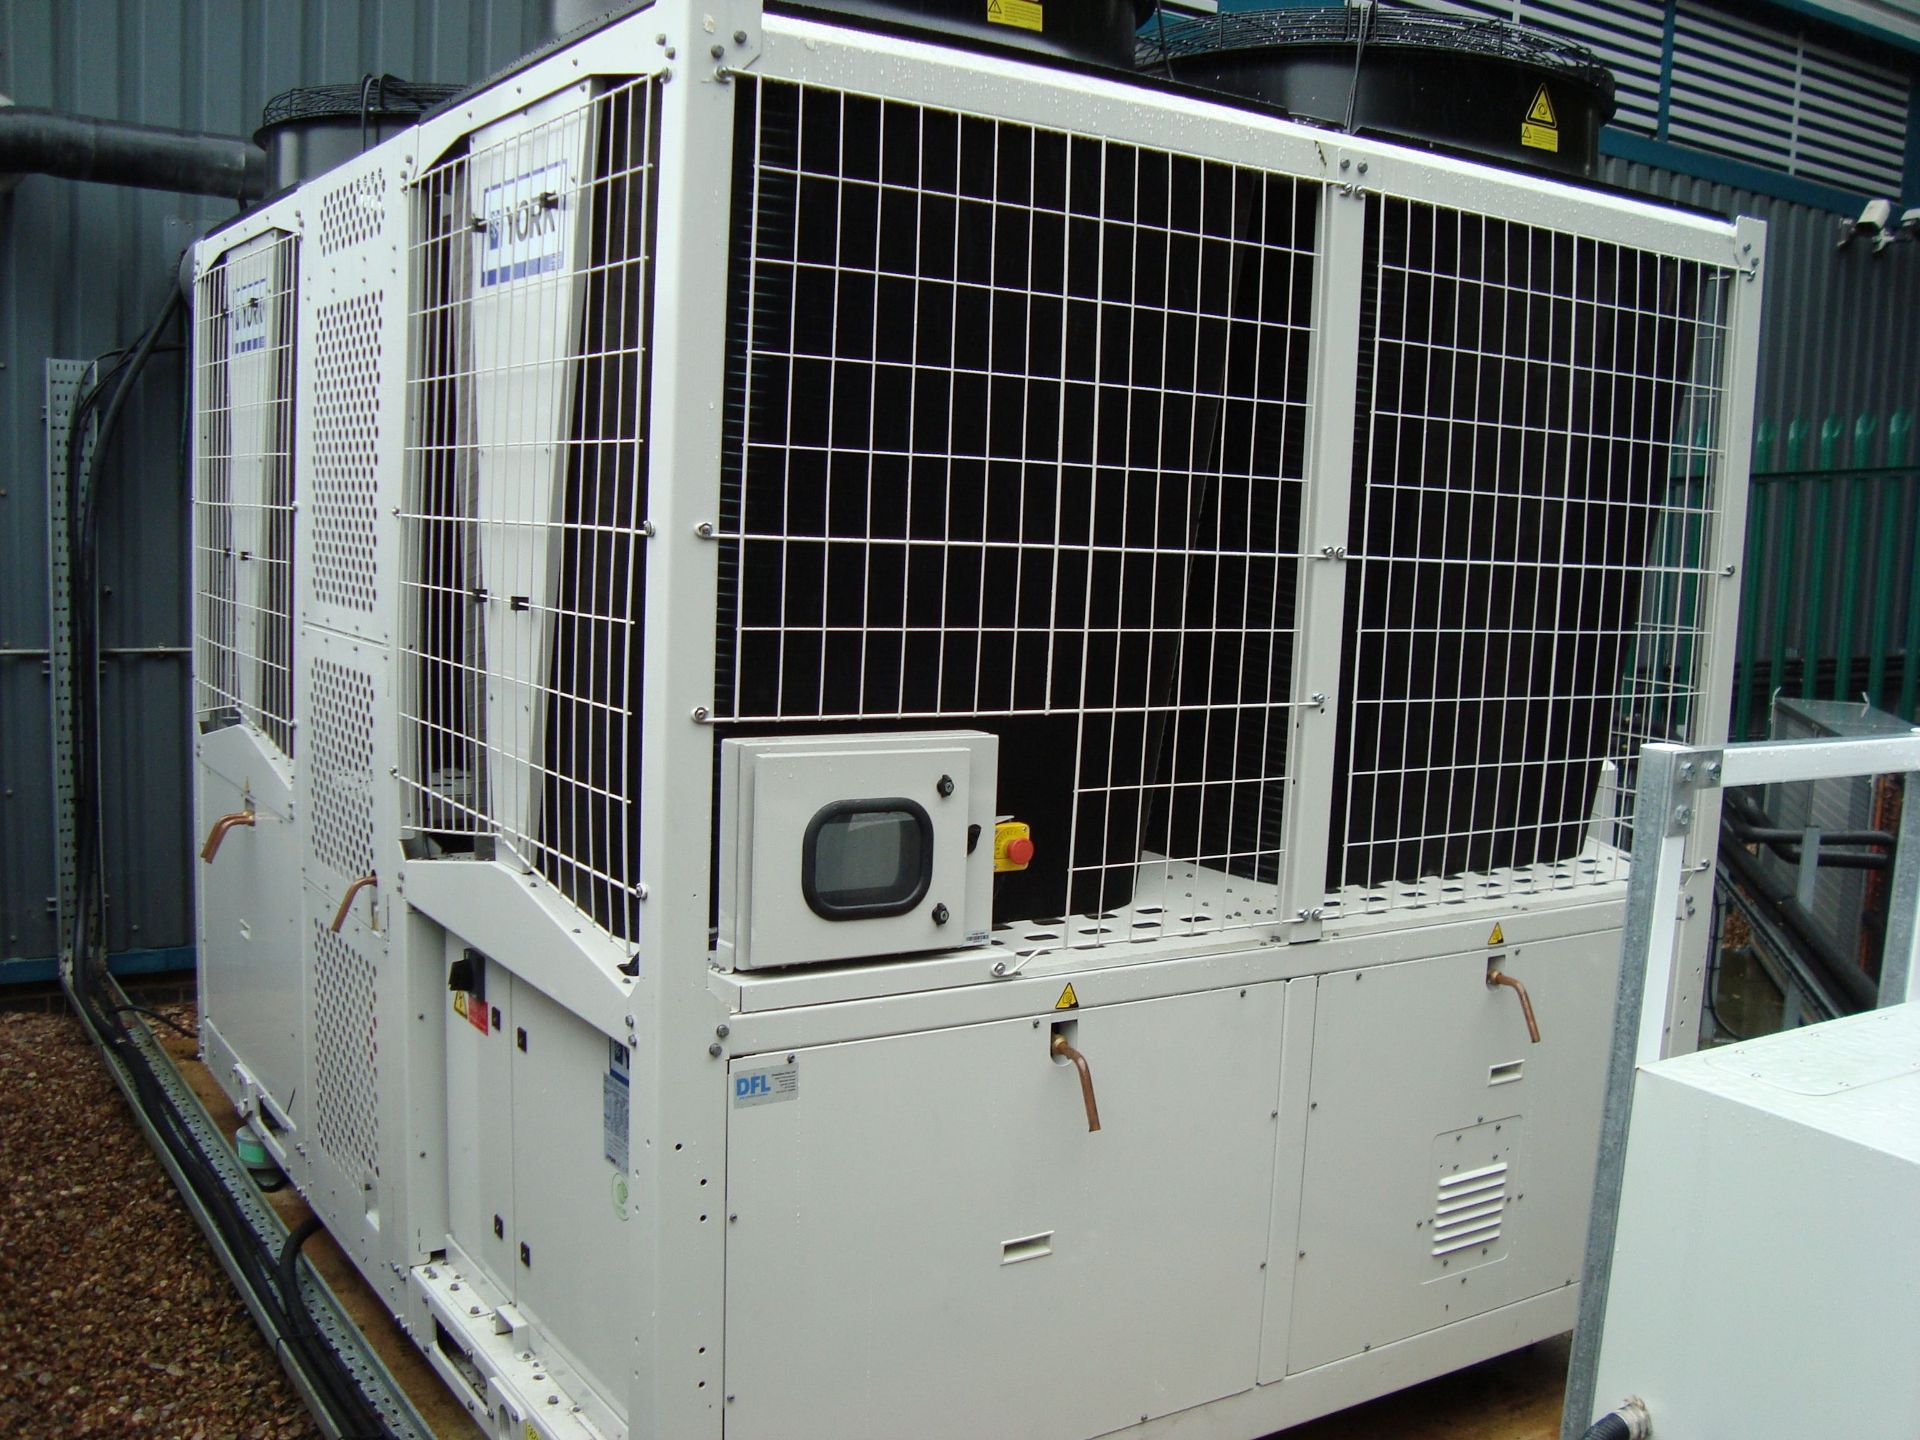 A York YMPA0260PJ50 air cooled chiller heat pump, Serial Number: 50532E11202952 (2021) A work Method